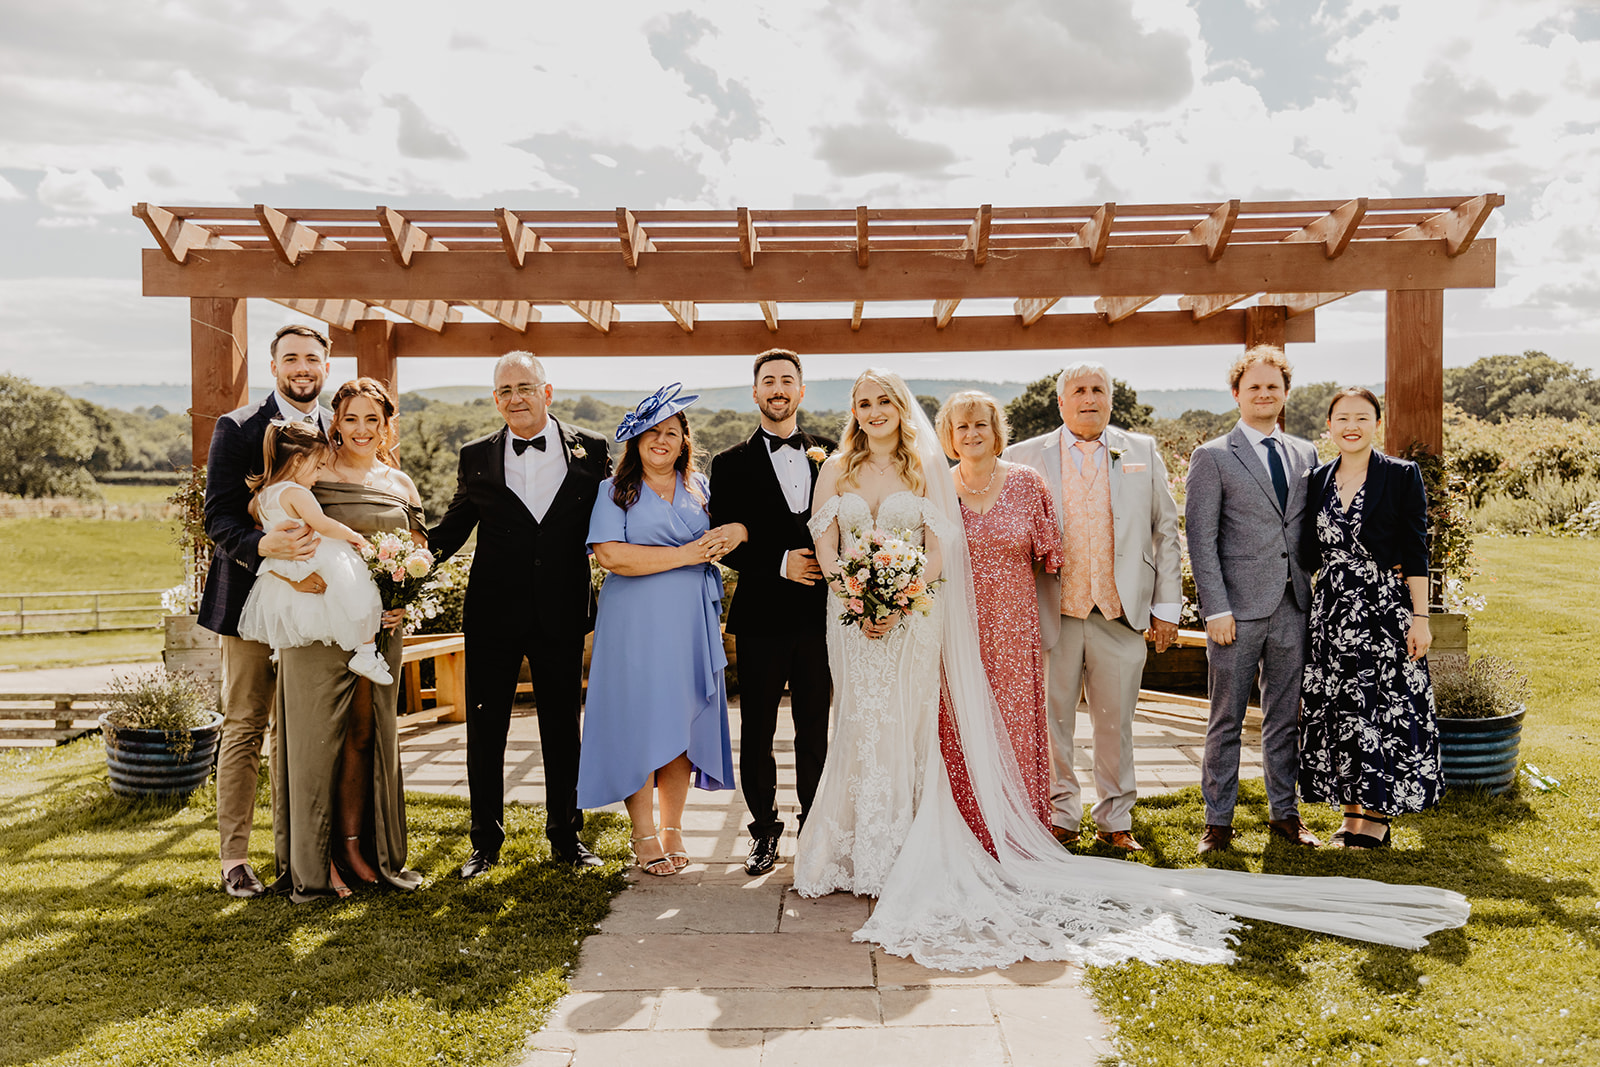 Family photos at a Southlands barn wedding, Sussex. Photo by OliveJoy Photography.